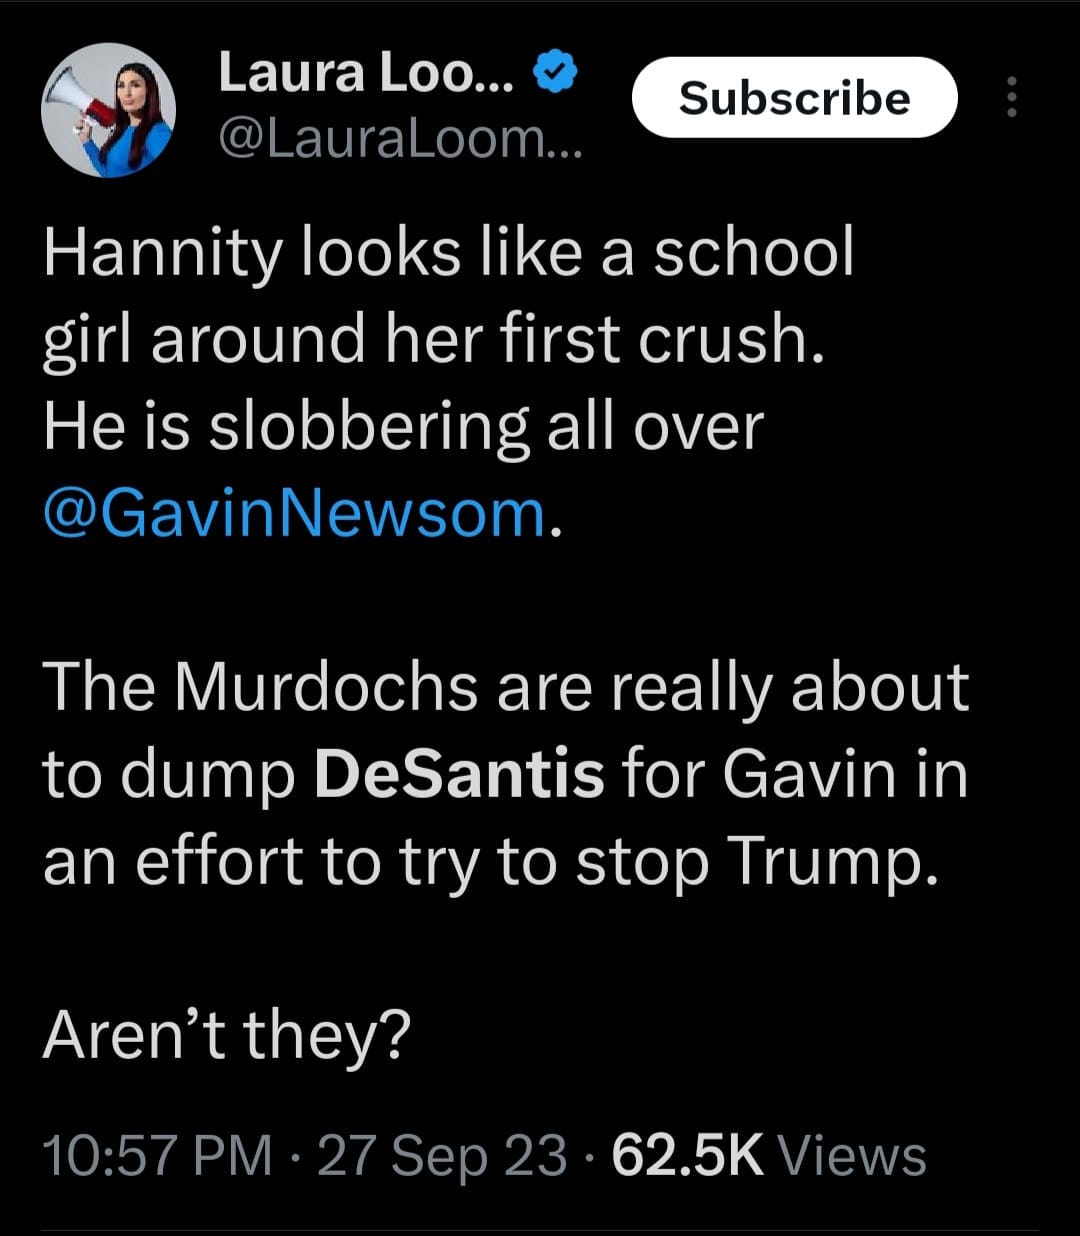 May be an image of 1 person and text that says 'Laura Loo... @LauraLoom... Subscribe Hannity looks like a school girl around her first crush. He is slobbering all over @GavinNewsom. The Murdochs are really about to dump DeSantis for Gavin in an effort to try to stop Trump. Aren't they? 10:57 PM 27 Sep 23 62.5K Views'